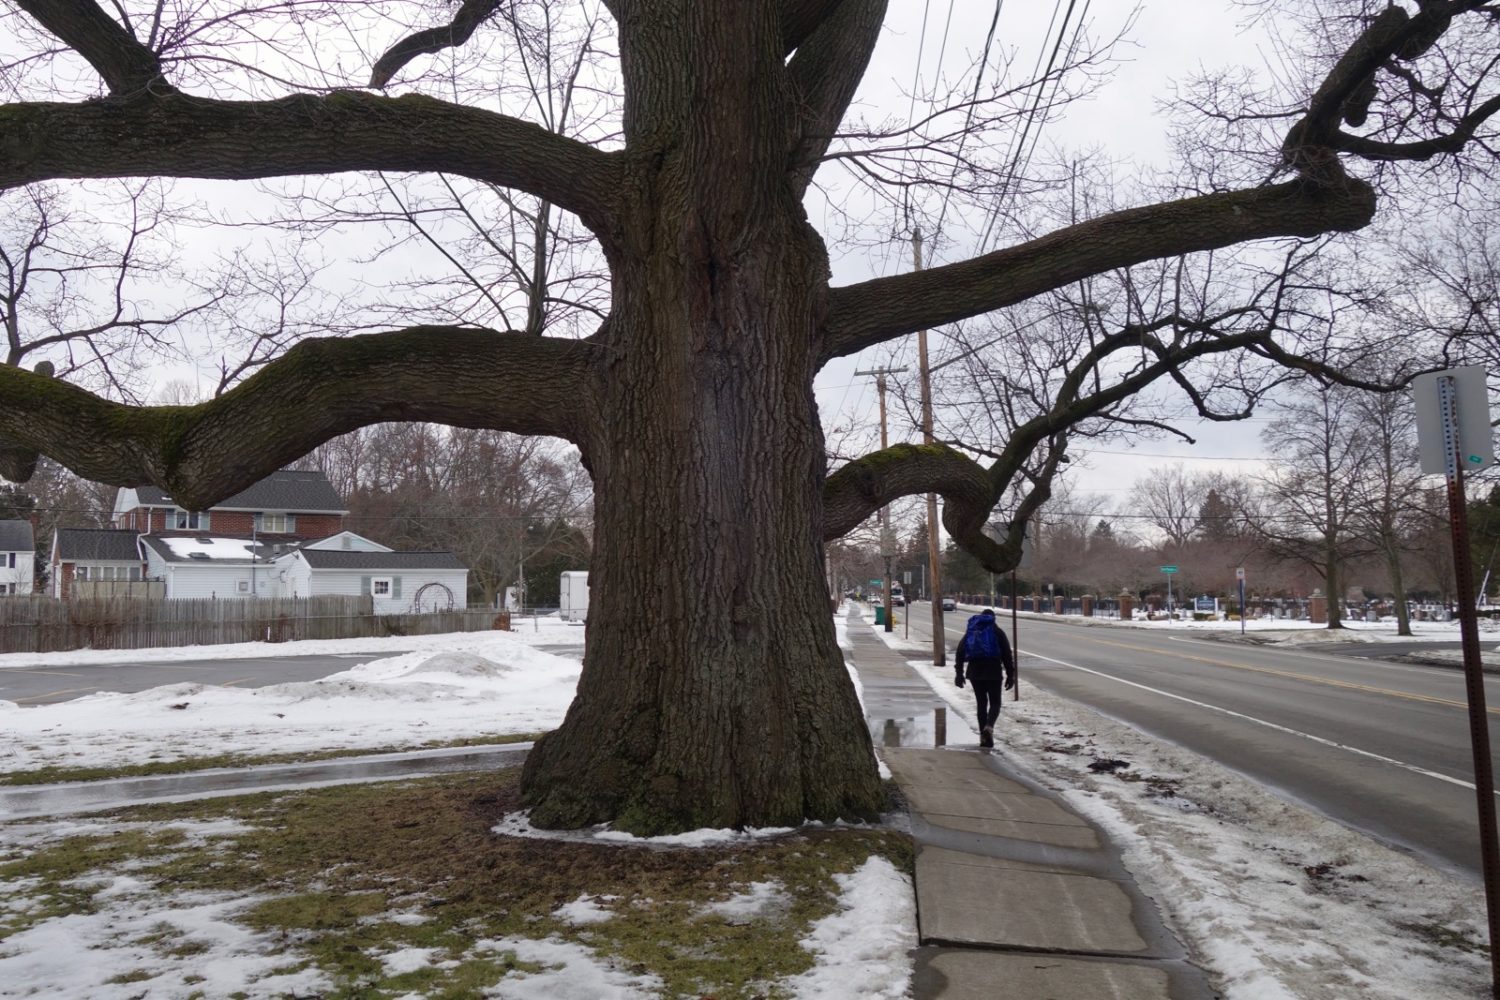 Peggi with backpack under 250 year old old tree on Culver Road